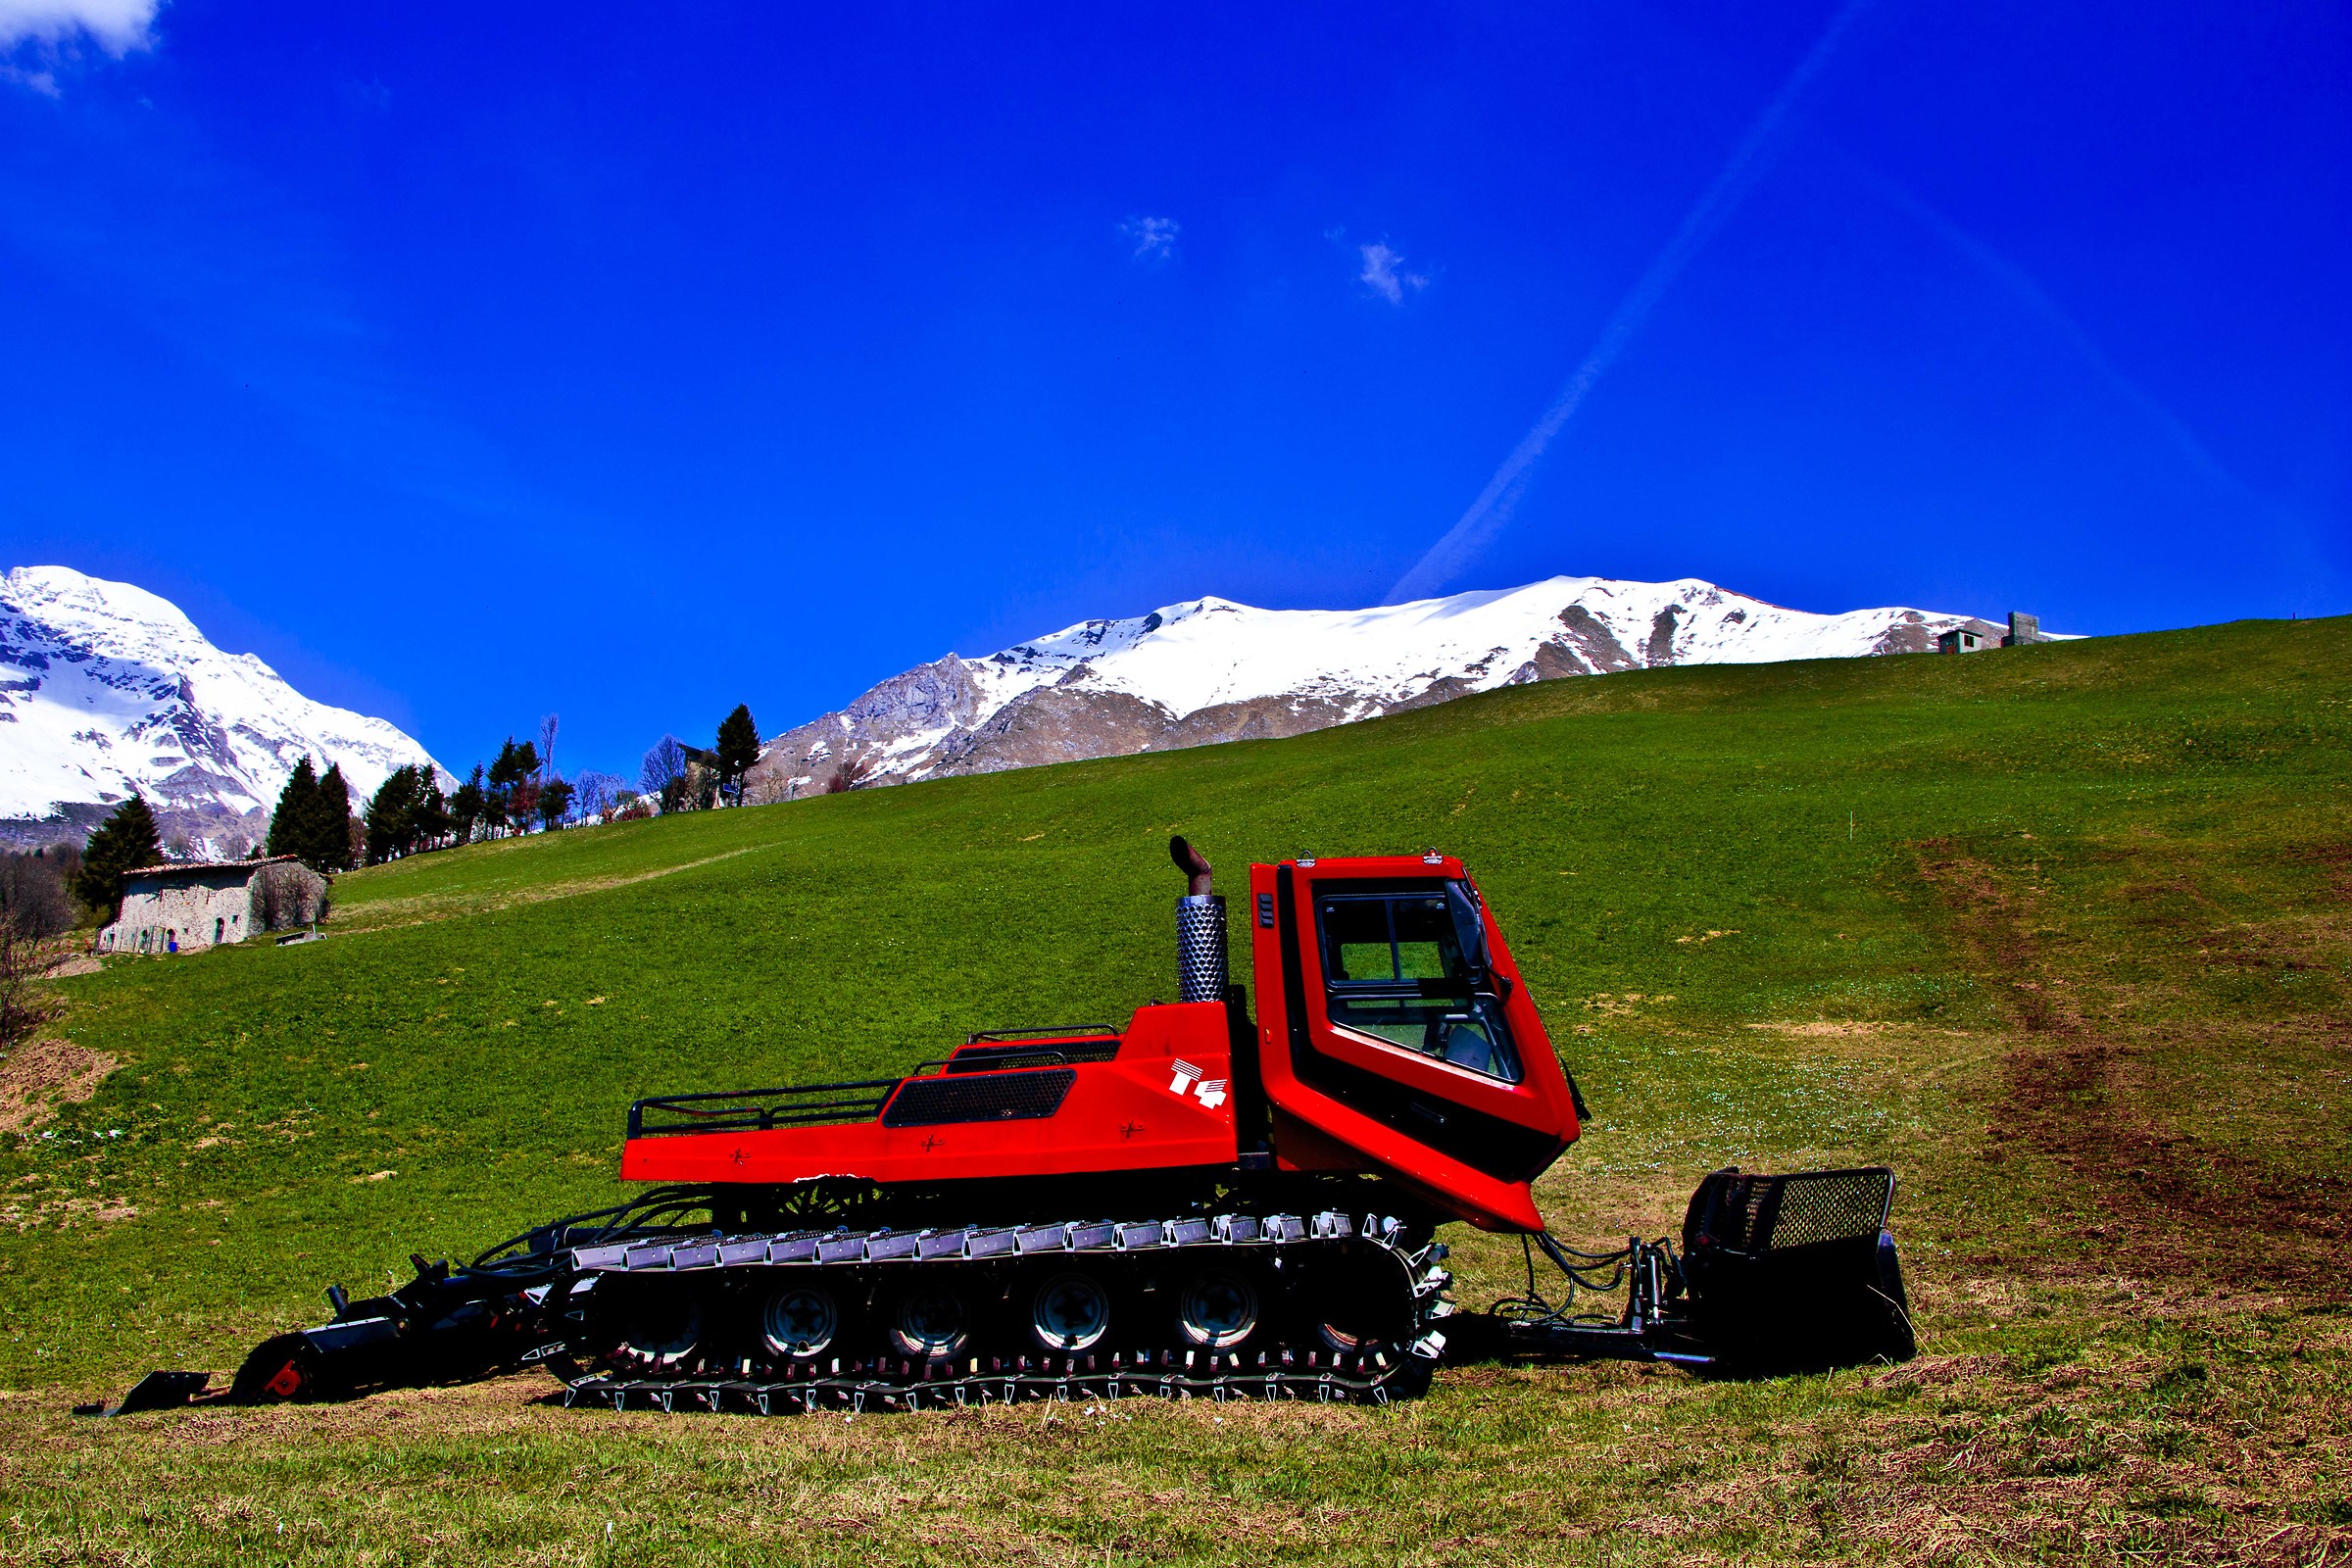 Snowplow on holiday...